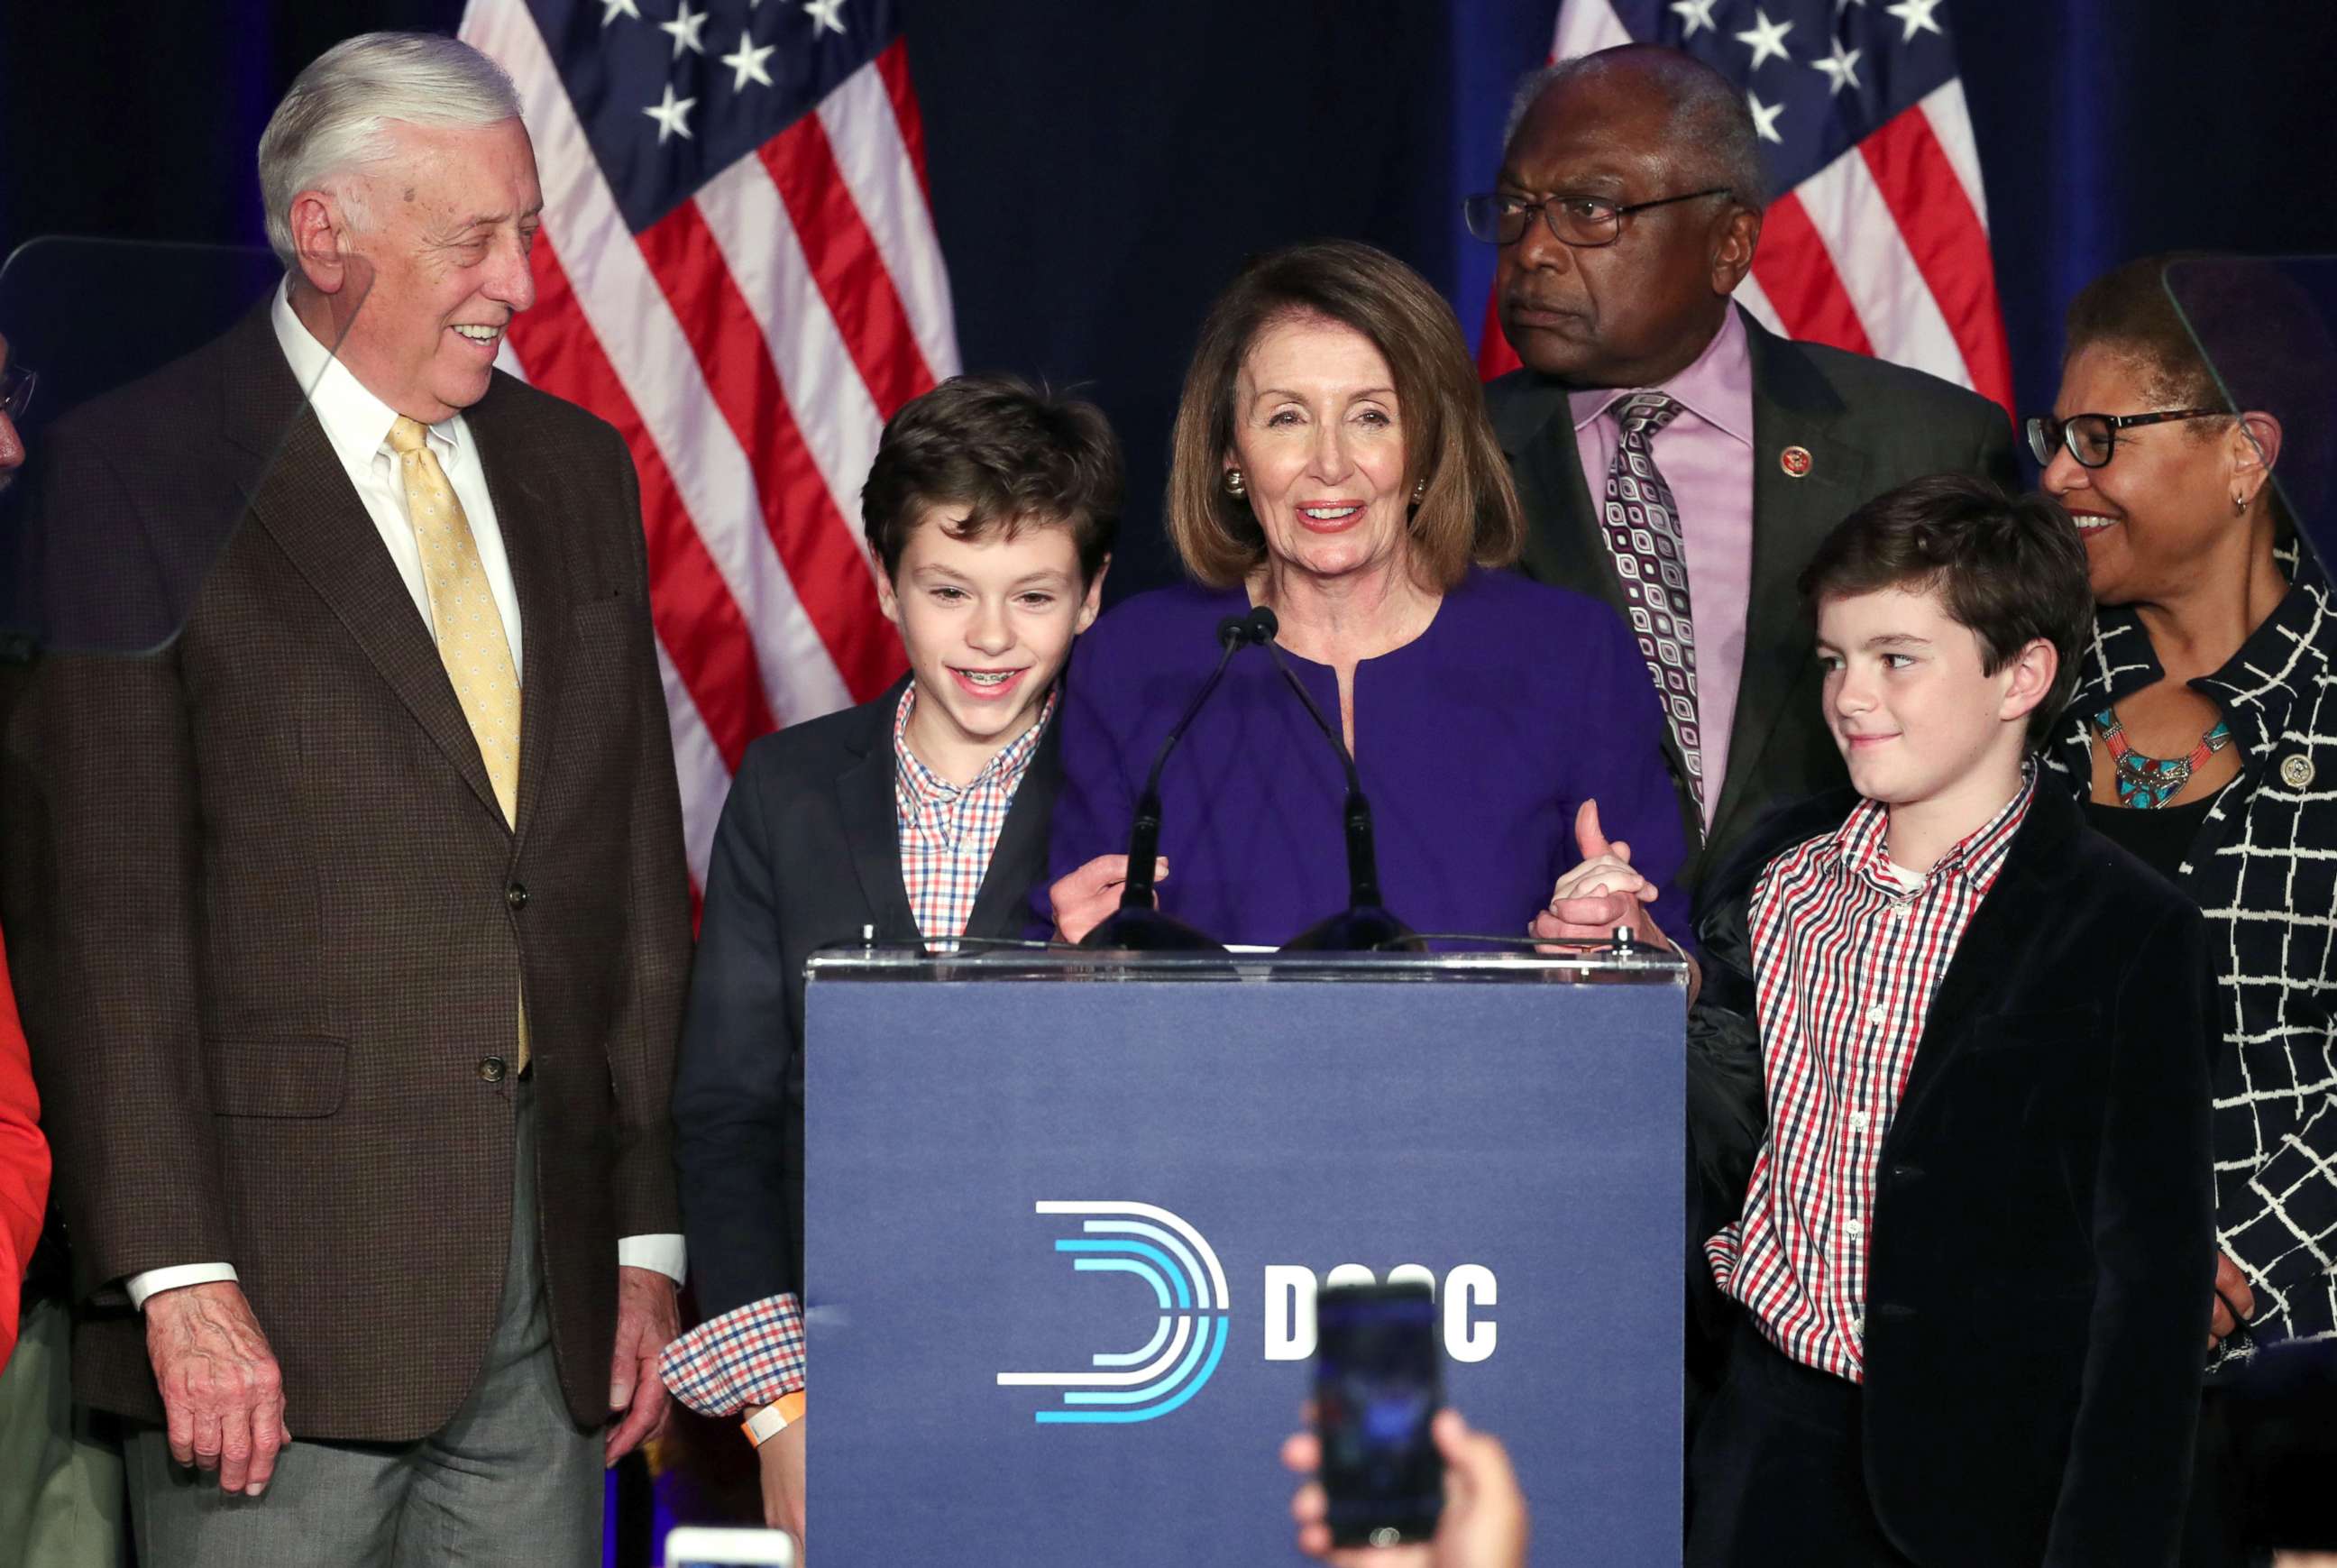 PHOTO: House minority leader Nancy Pelosi celebrates the Democrats winning a majority in the House of Representatives with minority whip Steny Hoyer, left, her grandsons and Rep. James Clyburn during an election night party in Washington, Nov. 6, 2018.